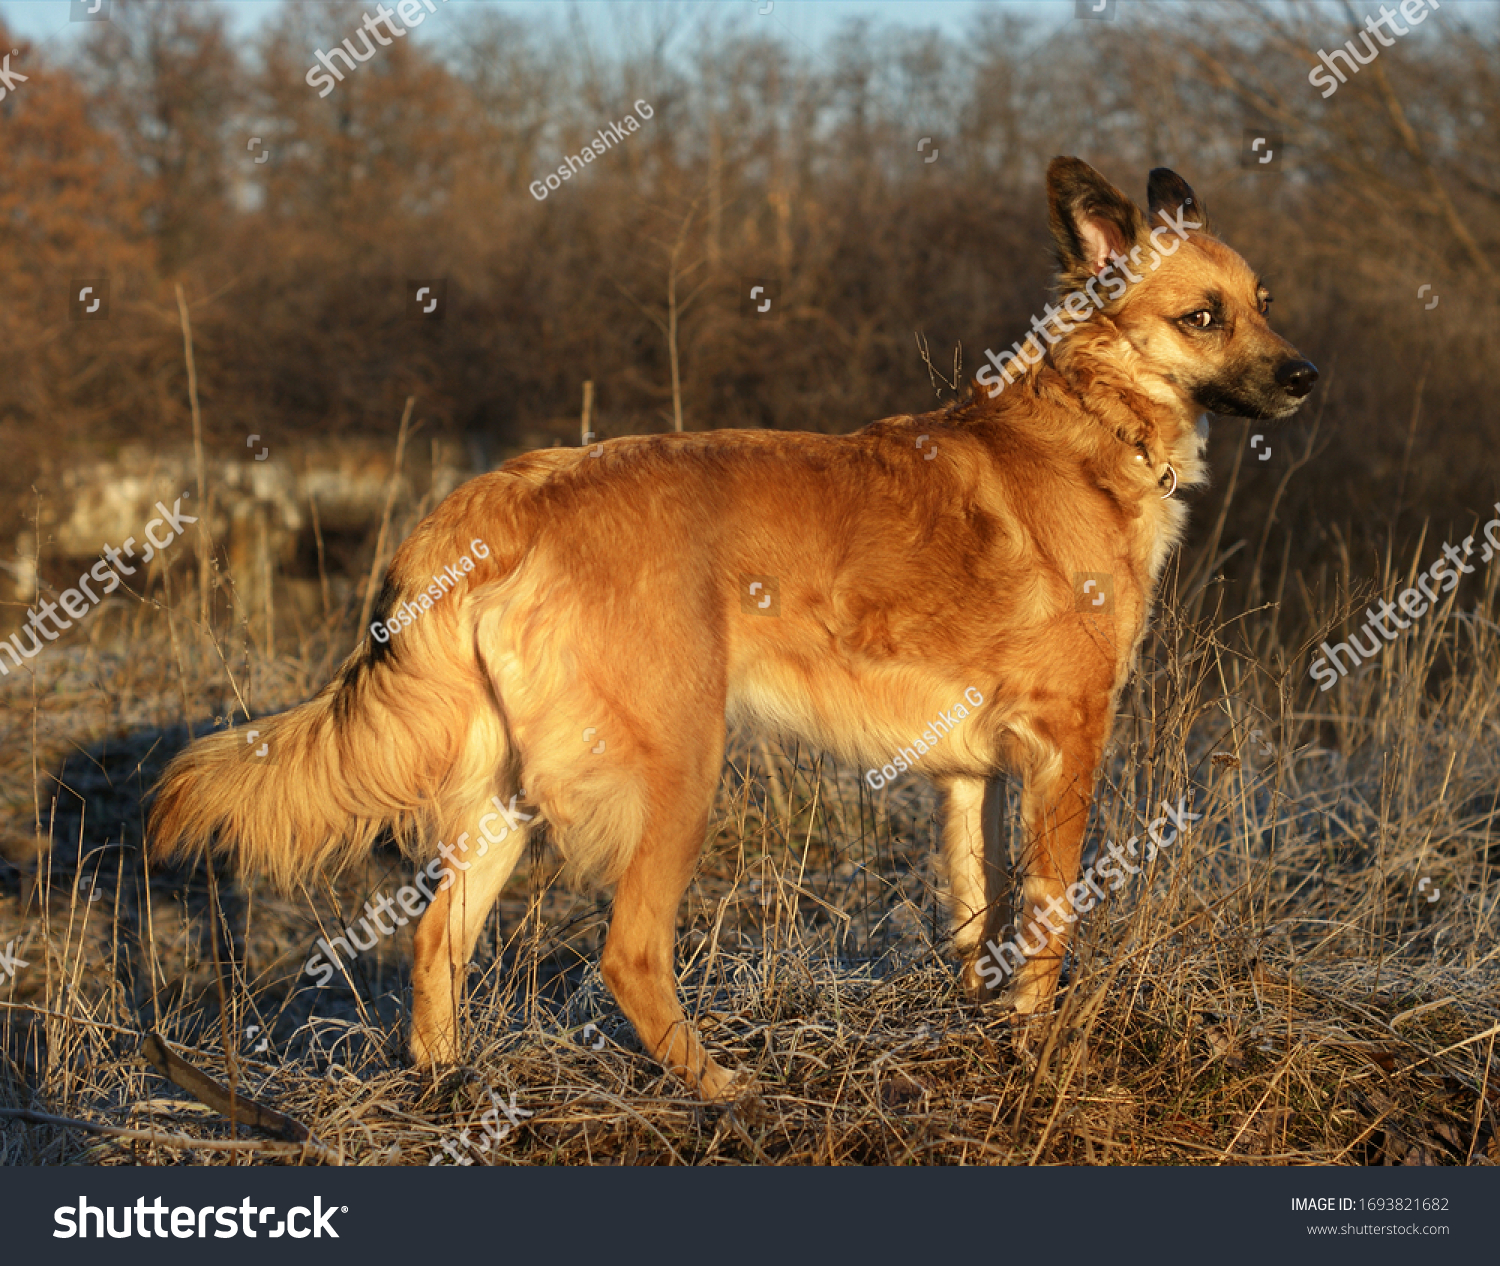 Red-headed yard dogs similar to Dingo. Domestic red dogs similar to Dingo wild dogs #1693821682